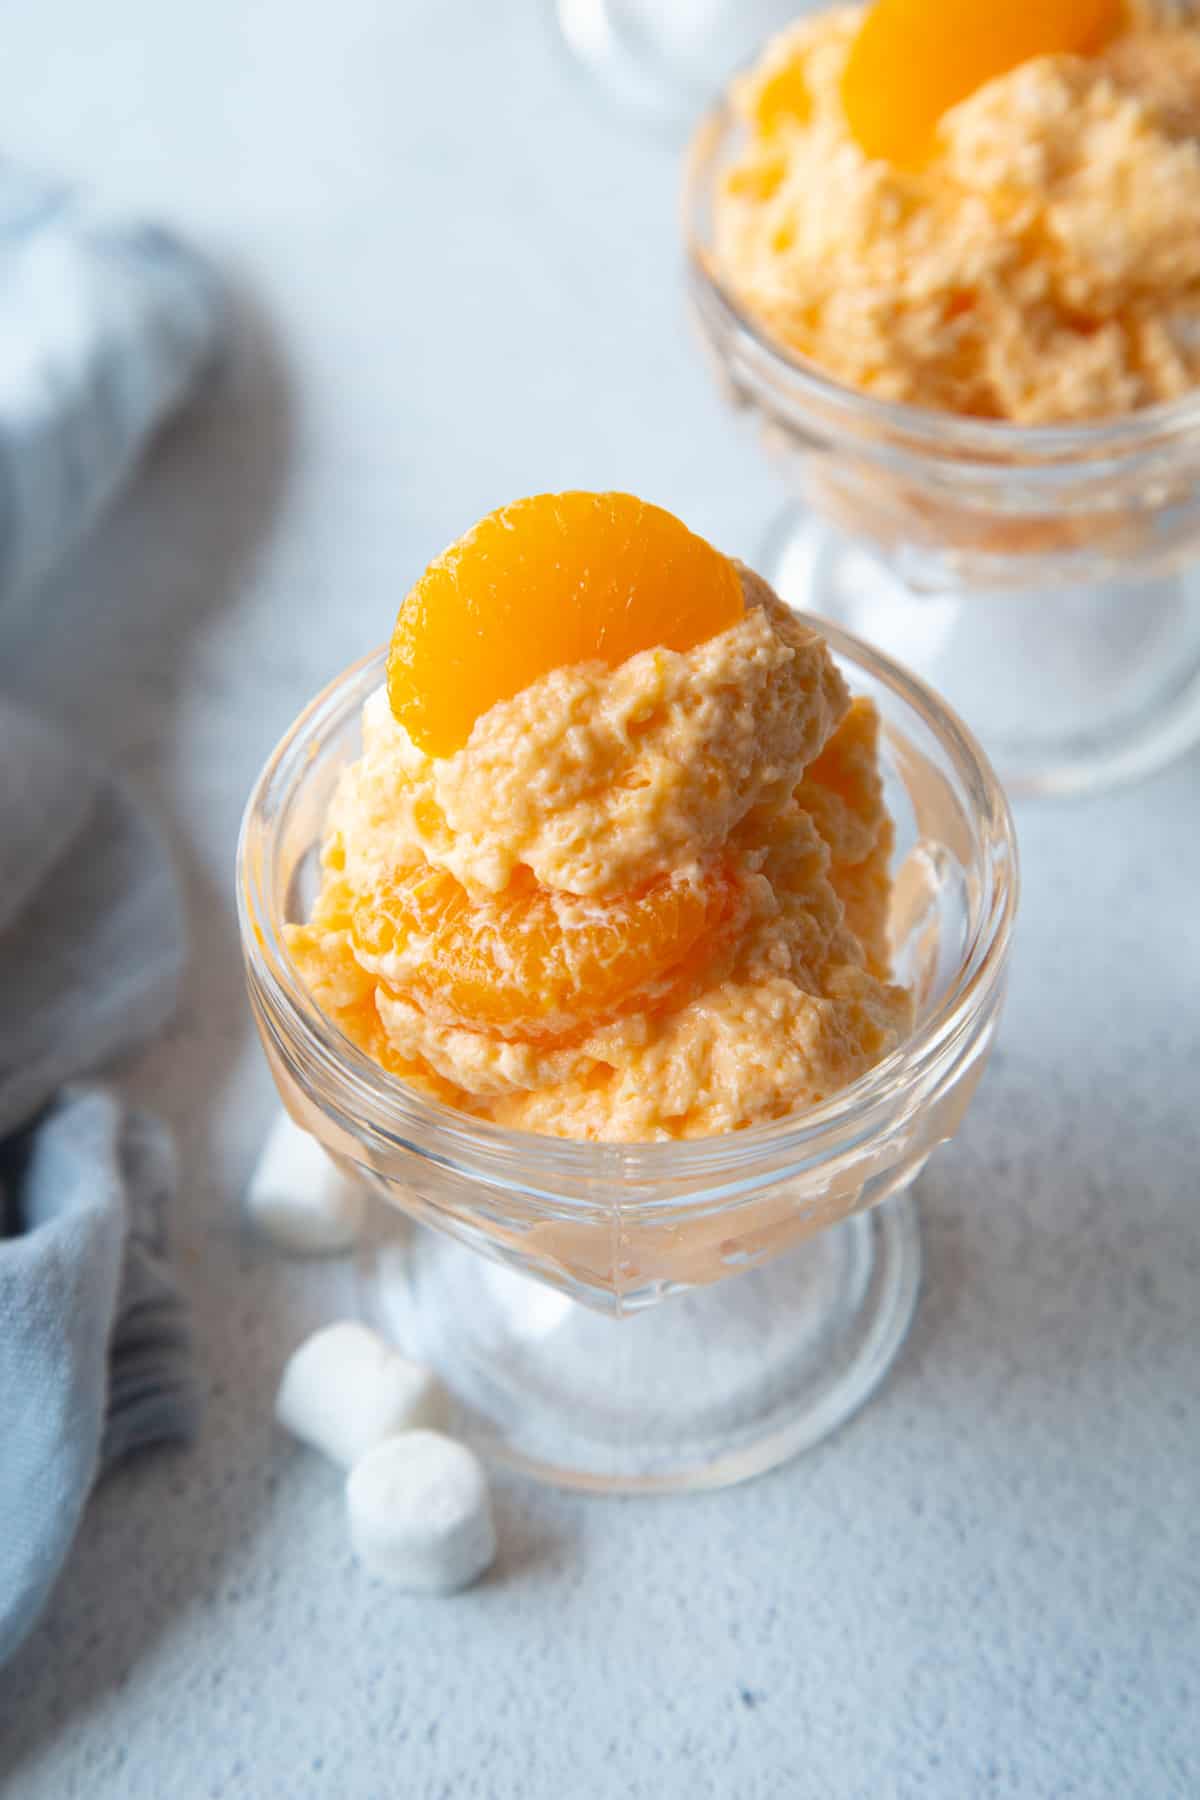 glass parfait dish with fluffy orange jello salad in it, with mandarin oranges on top.